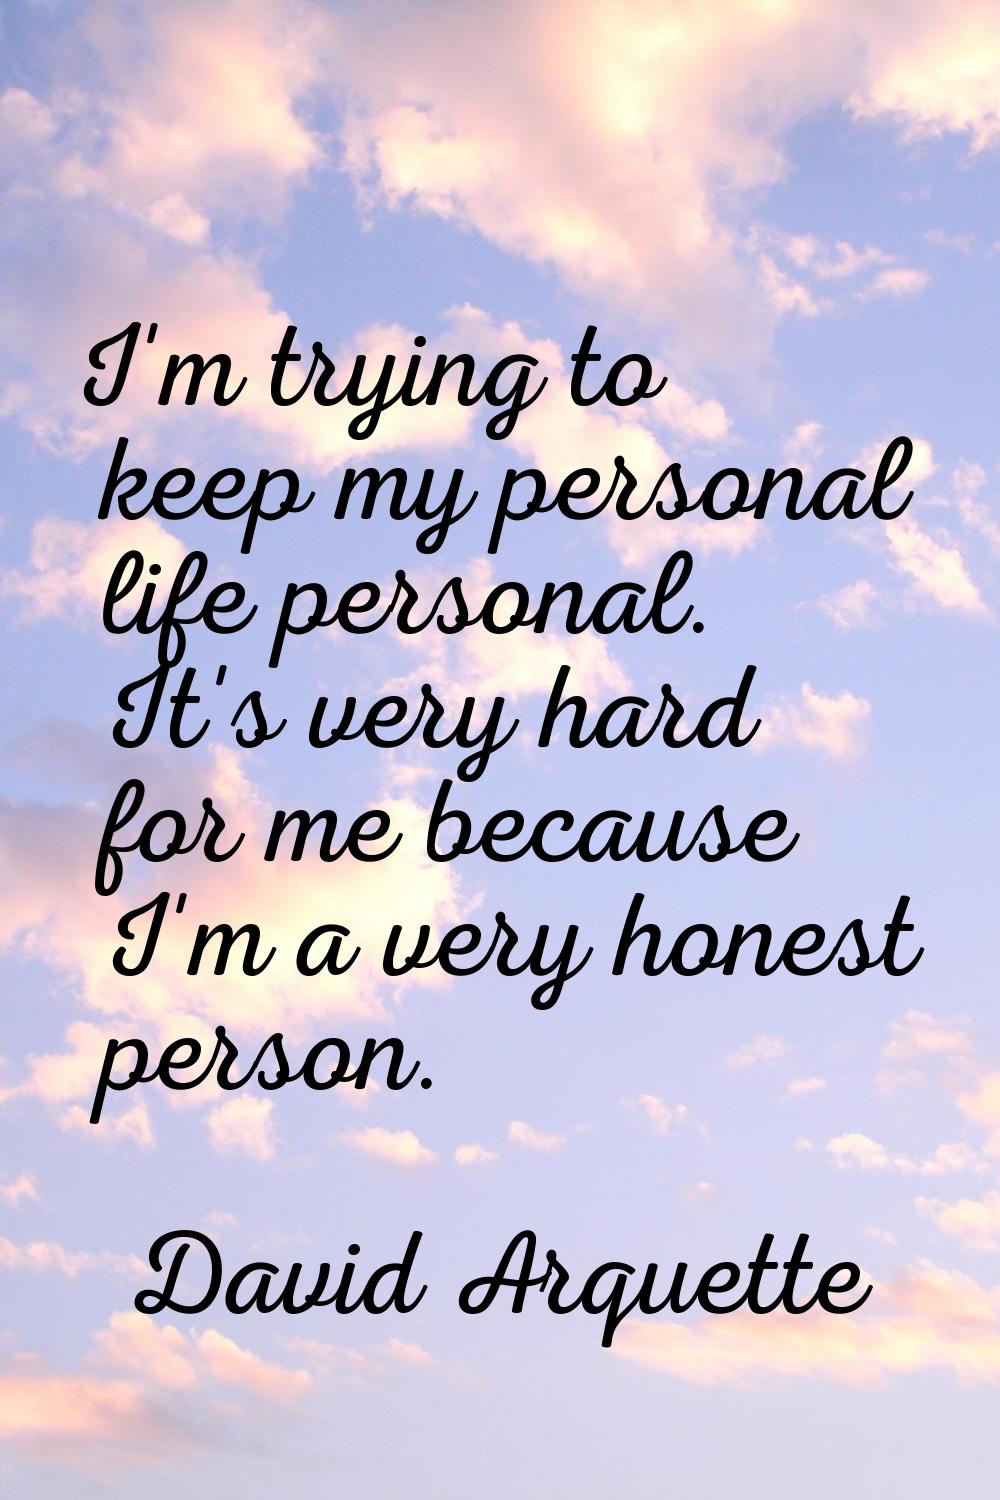 I'm trying to keep my personal life personal. It's very hard for me because I'm a very honest perso